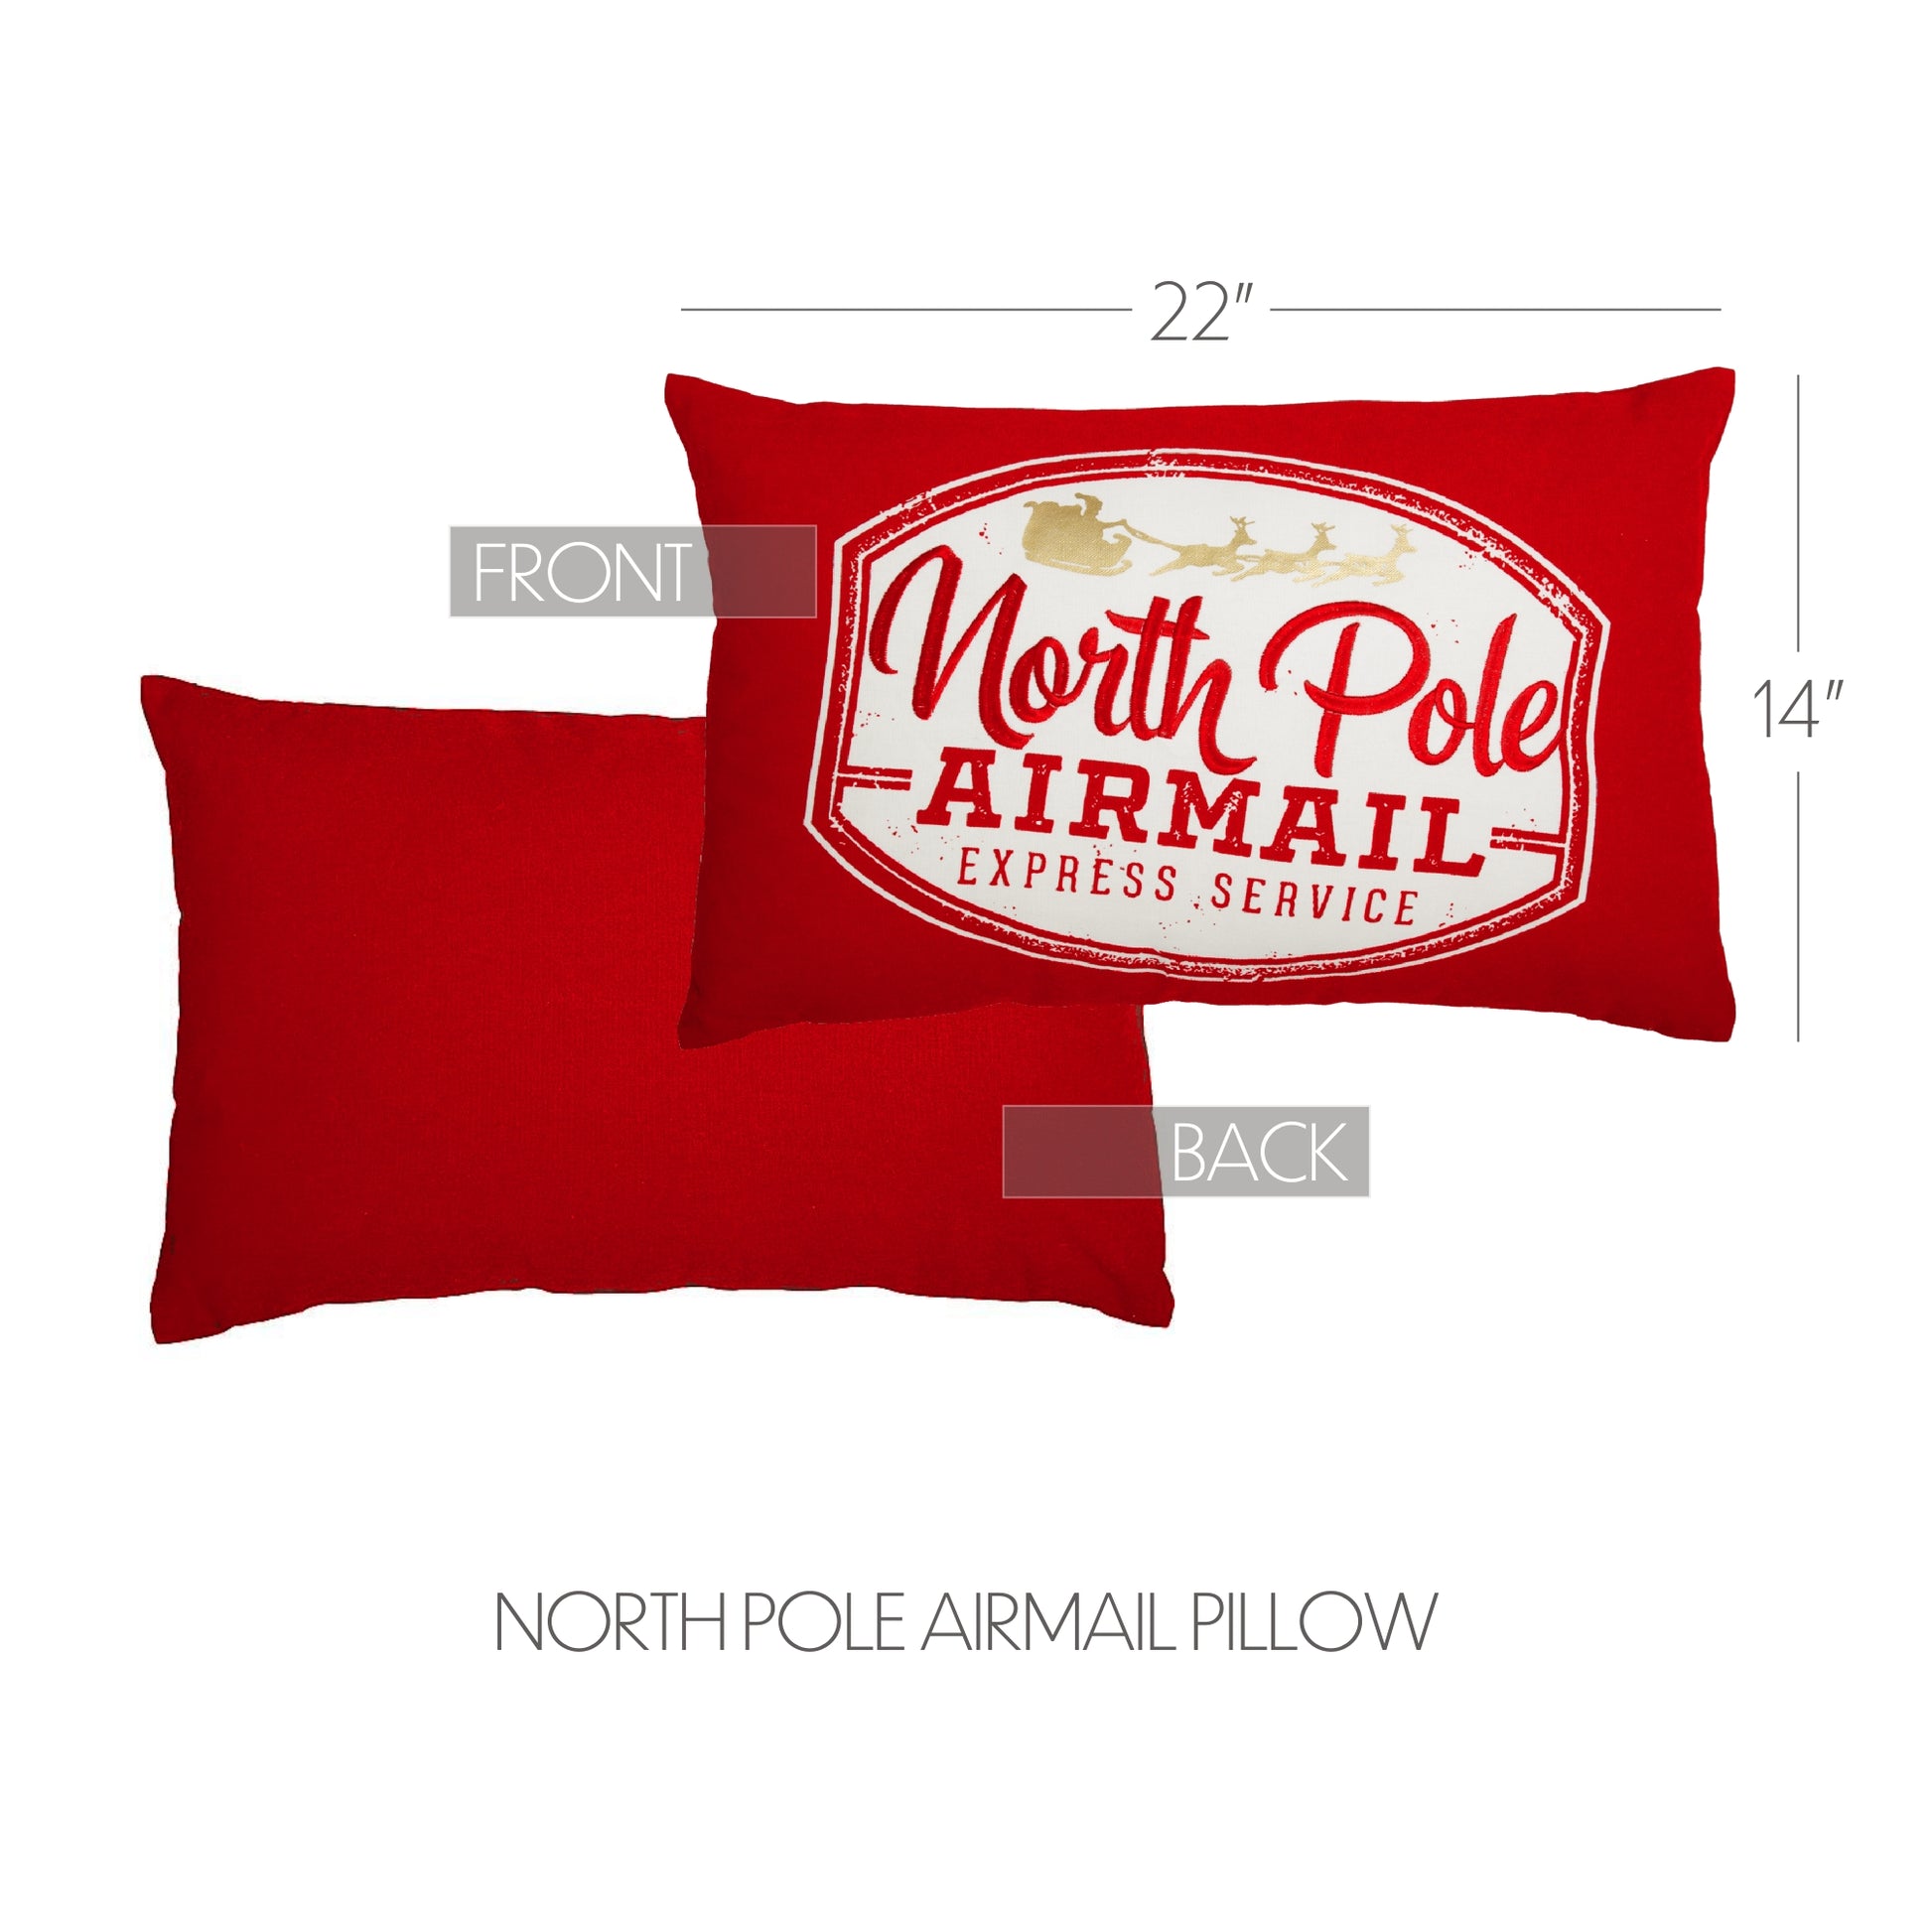 60359-North-Pole-Airmail-Pillow-14x22-image-5